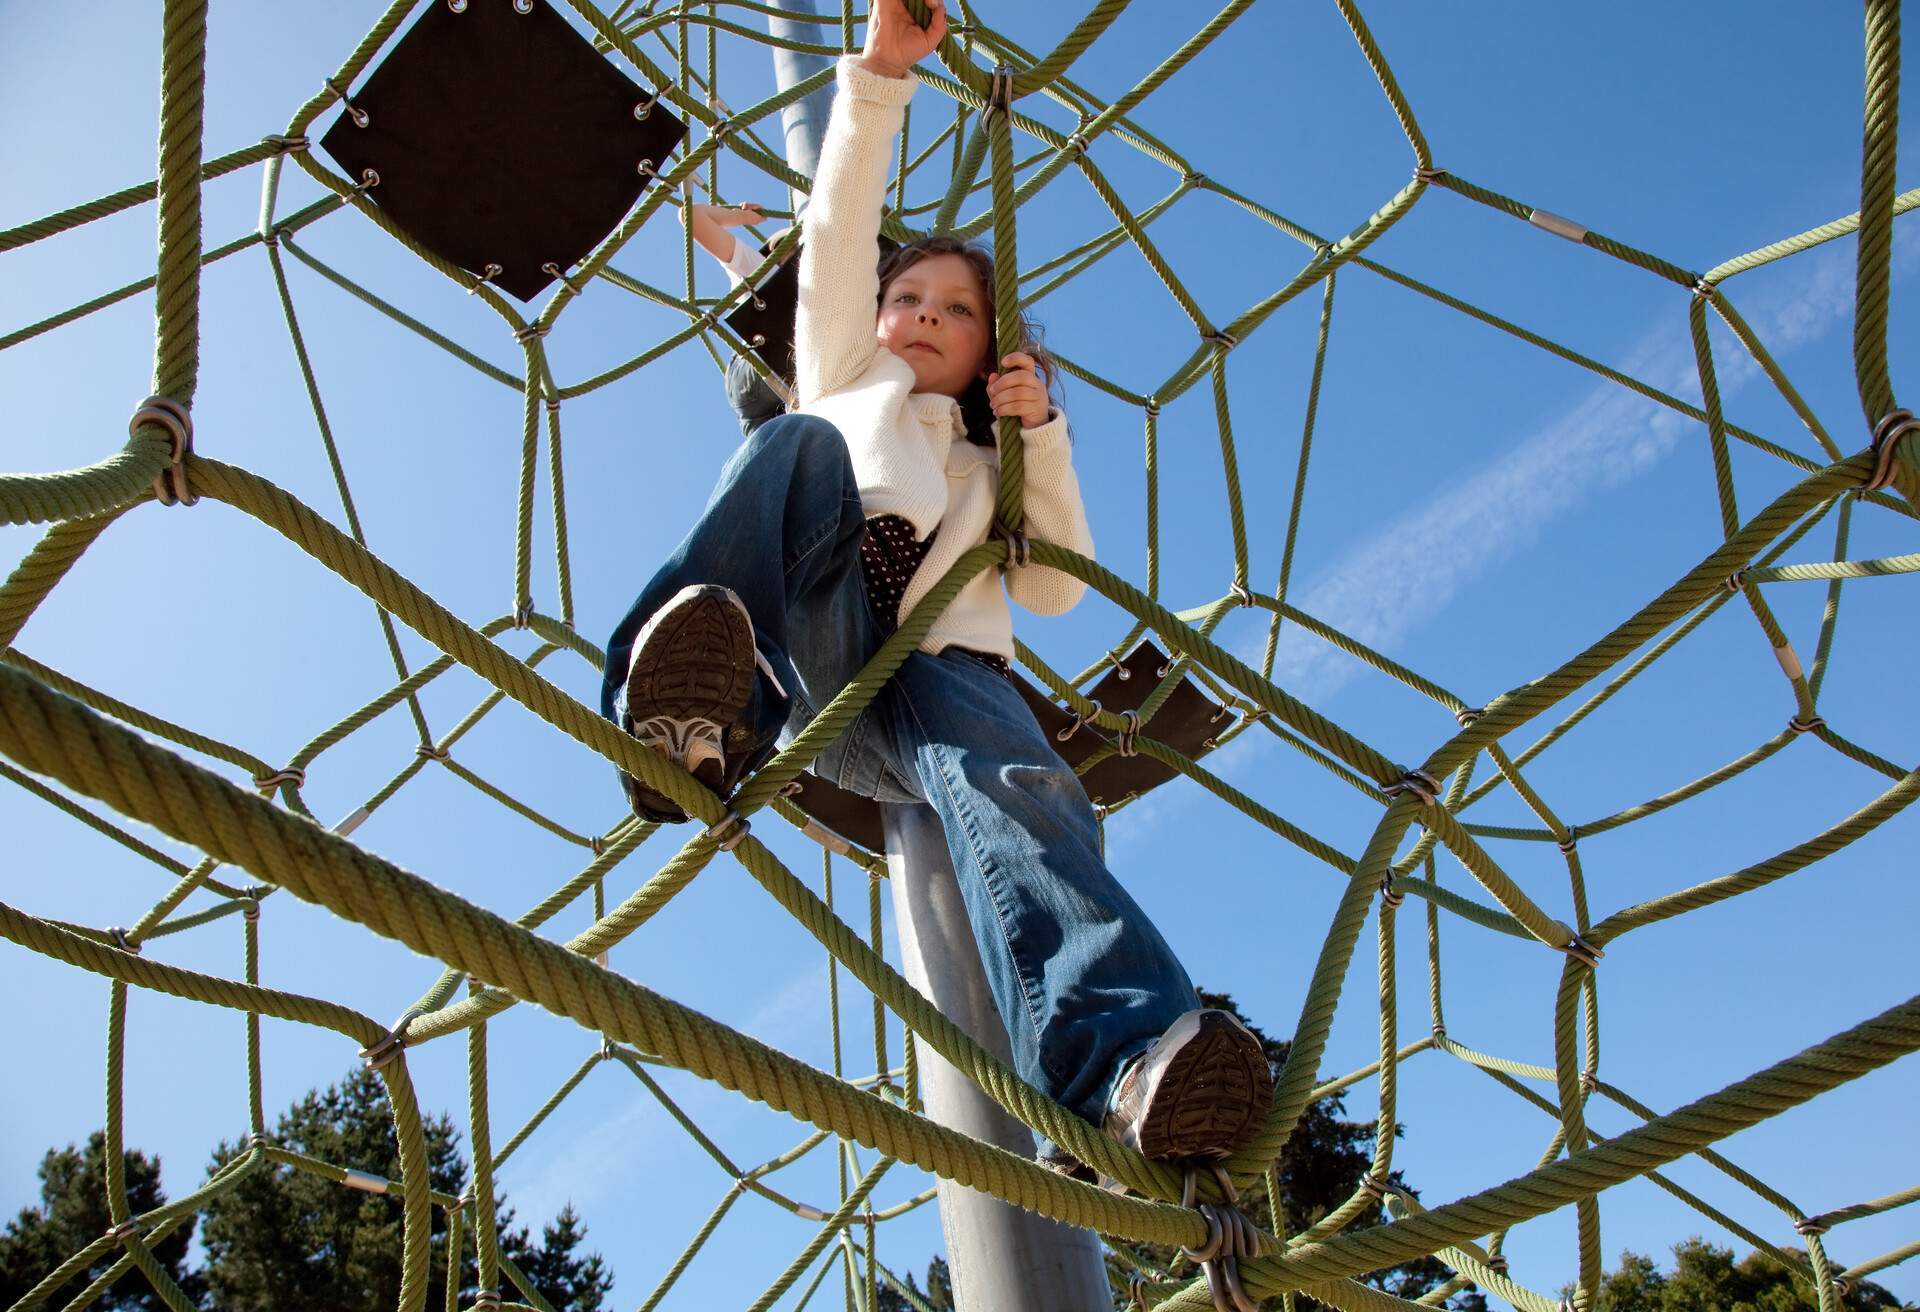 A girl climbing on a playground set with blue sky in the background.